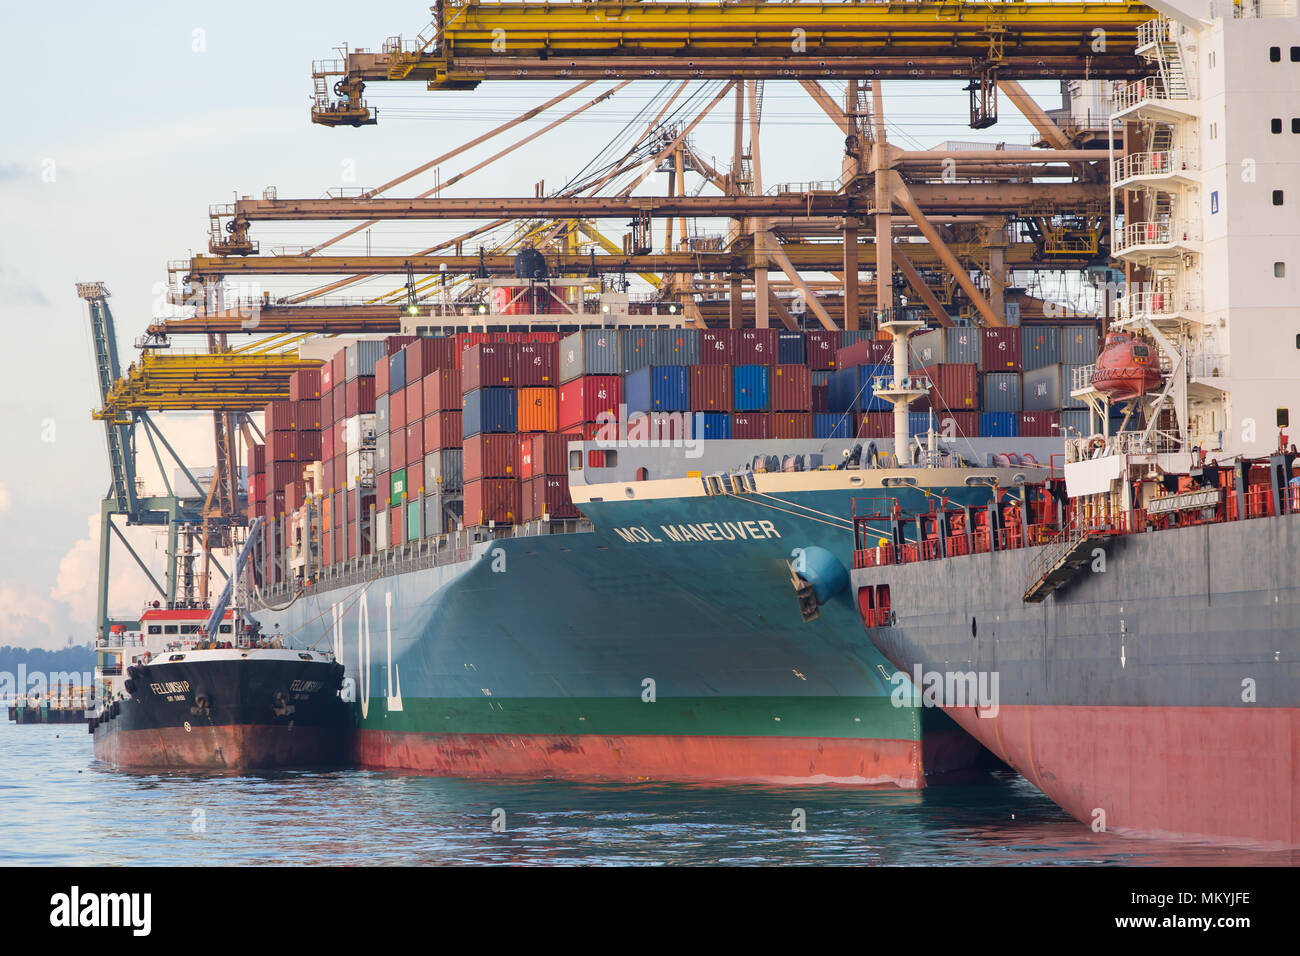 Vessel activities at industrial container sea port in Singapore. Stock Photo